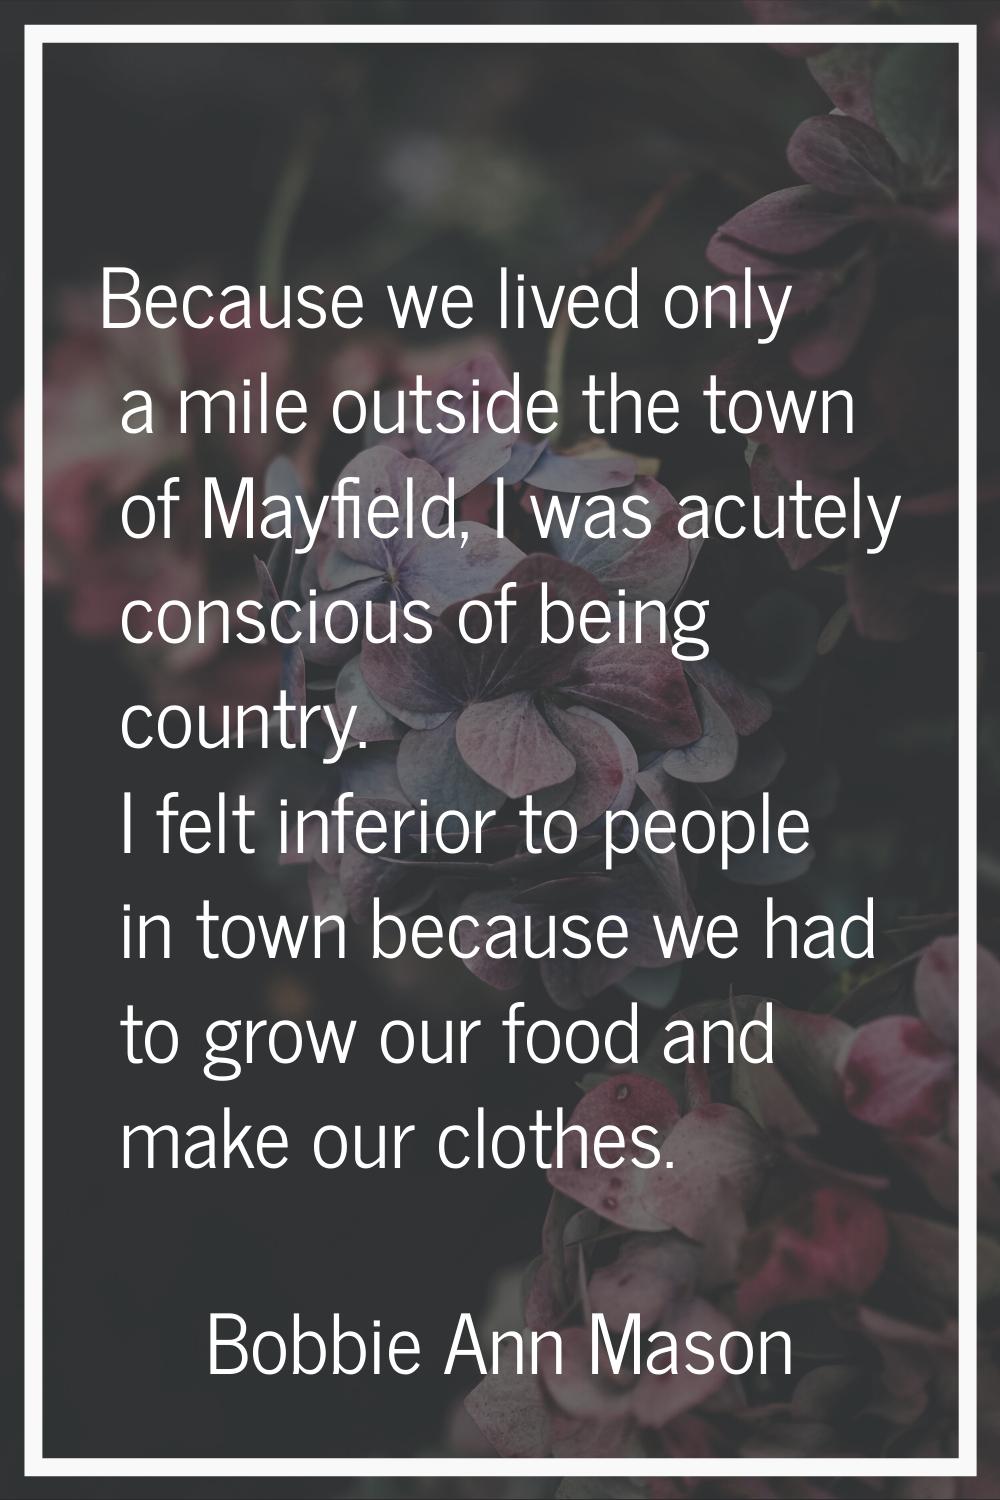 Because we lived only a mile outside the town of Mayfield, I was acutely conscious of being country